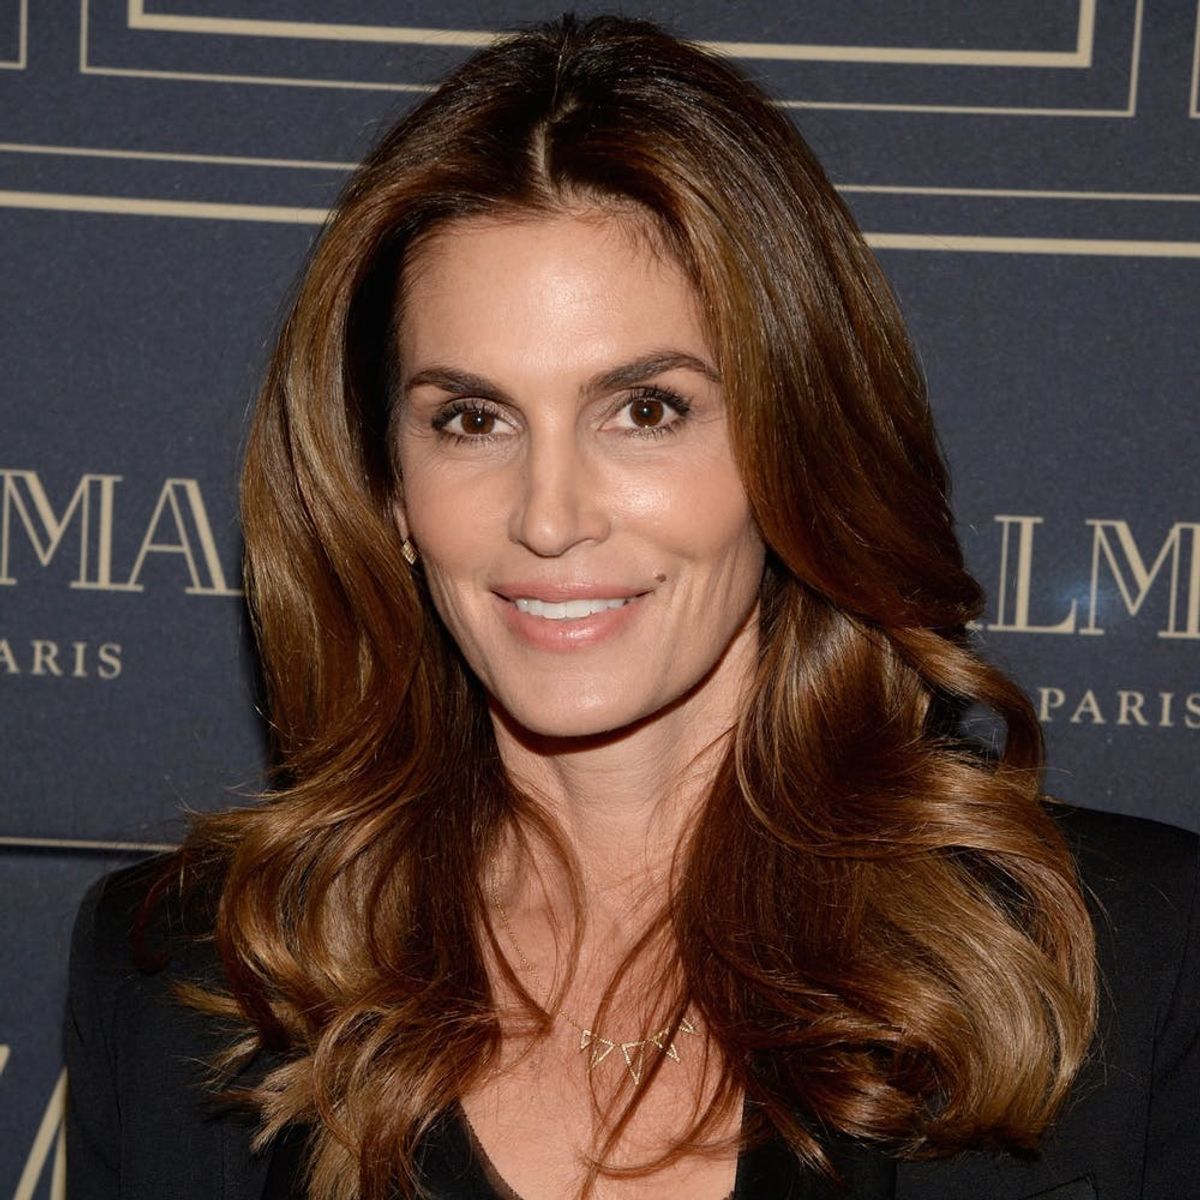 Cindy Crawford Celebrates 50 by Retiring from Modeling